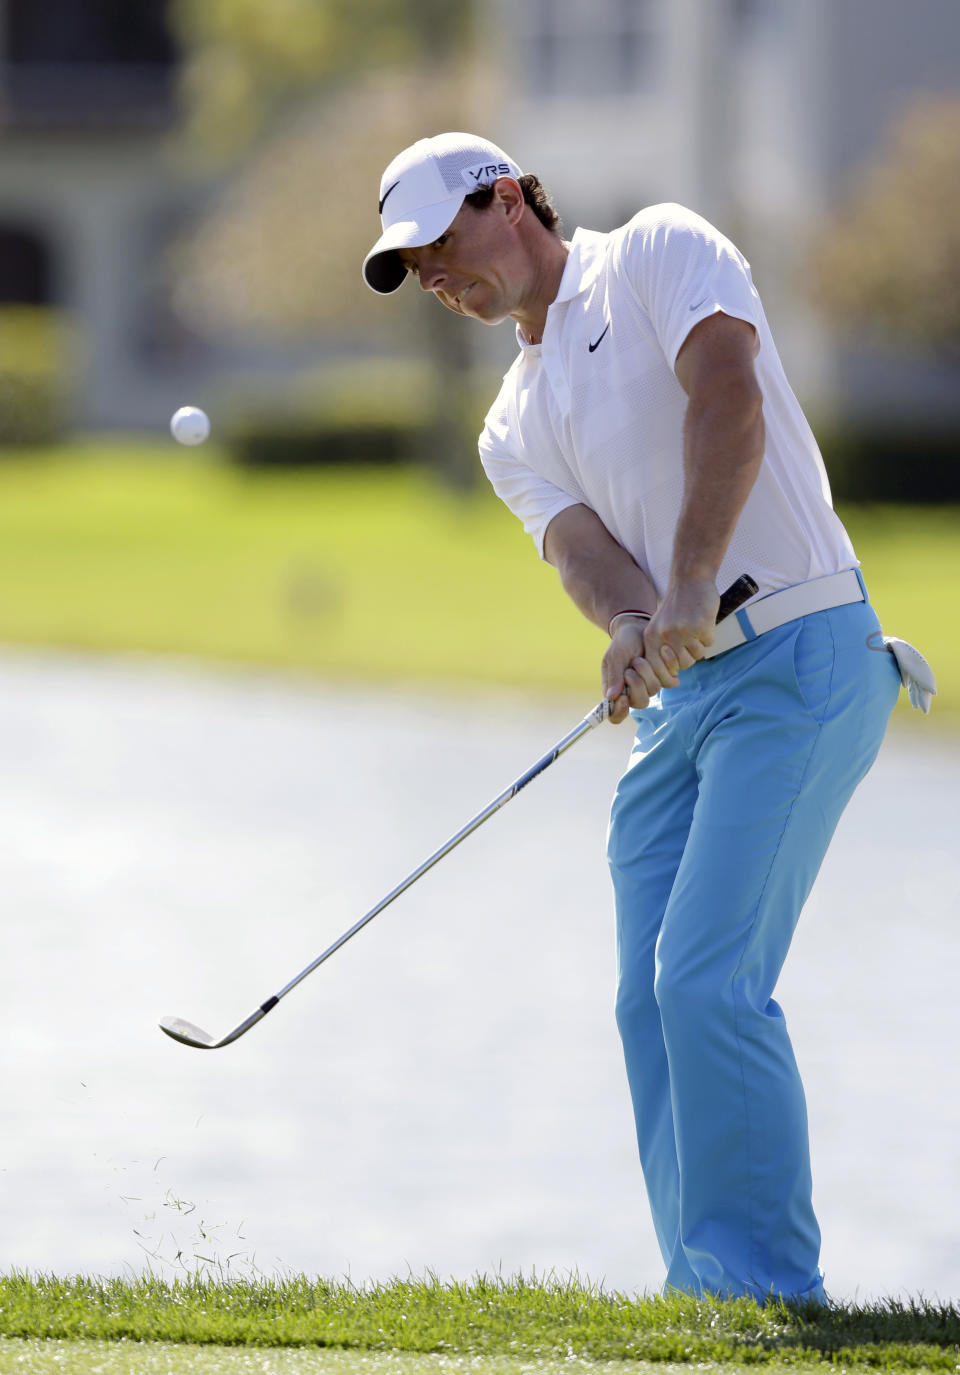 Rory McIlroy of Northern Ireland, chips onto the green on the sixth hole during the third round of the Honda Classic golf tournament, Saturday, March 1, 2014 in Palm Beach Gardens, Fla. (AP Photo/Wilfredo Lee)